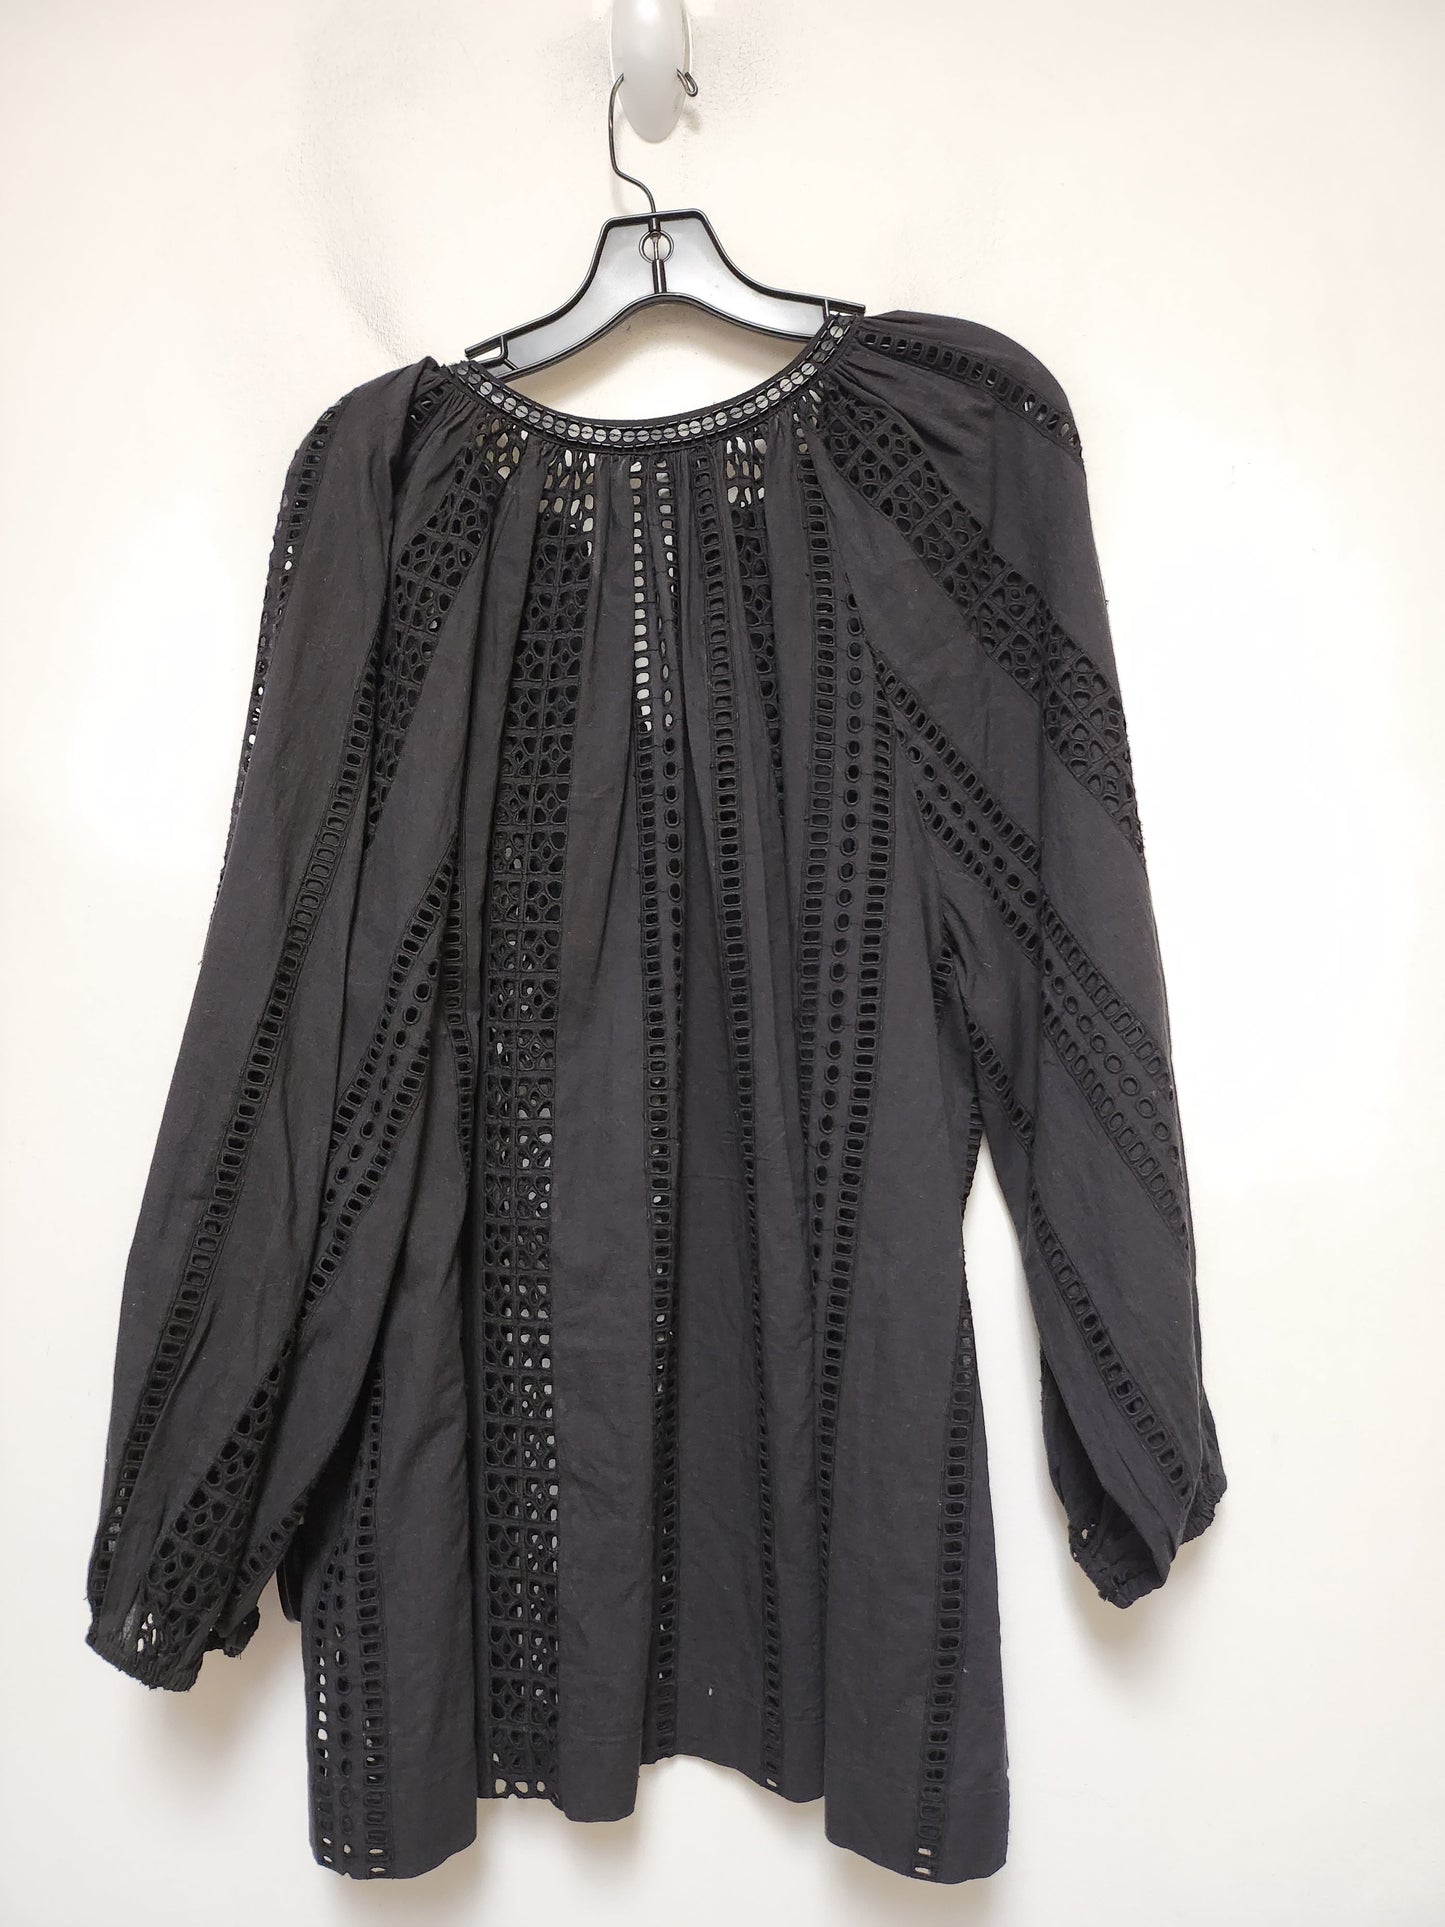 Black Top Long Sleeve Chicos, Size 2x